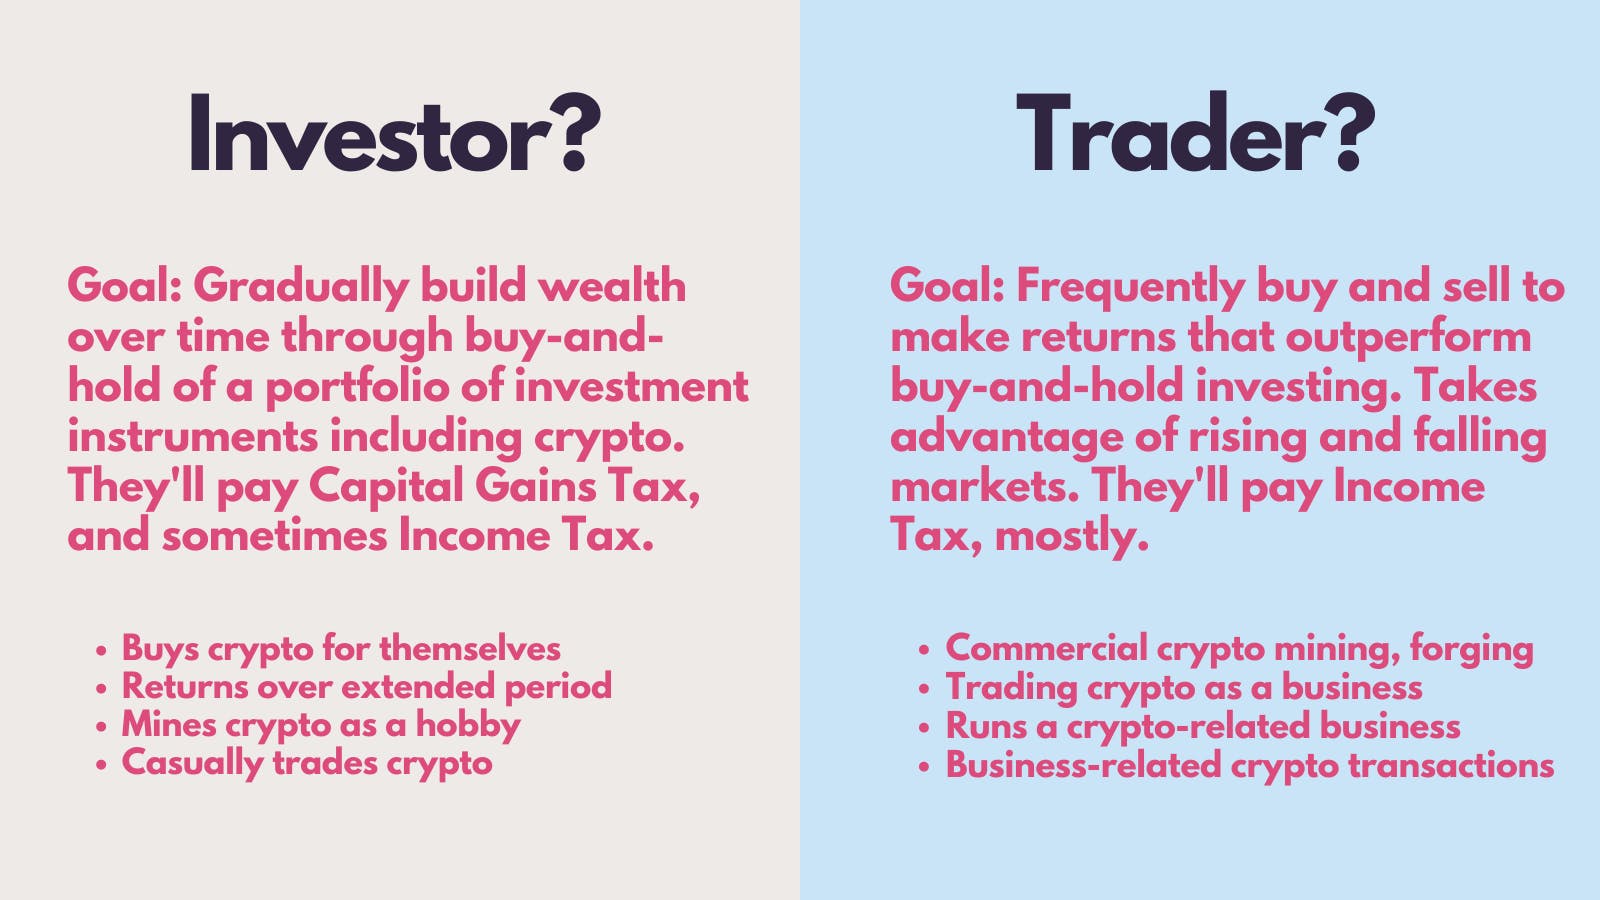 The ATO will tax Australian crypto trades based on whether you are an investor or a trader